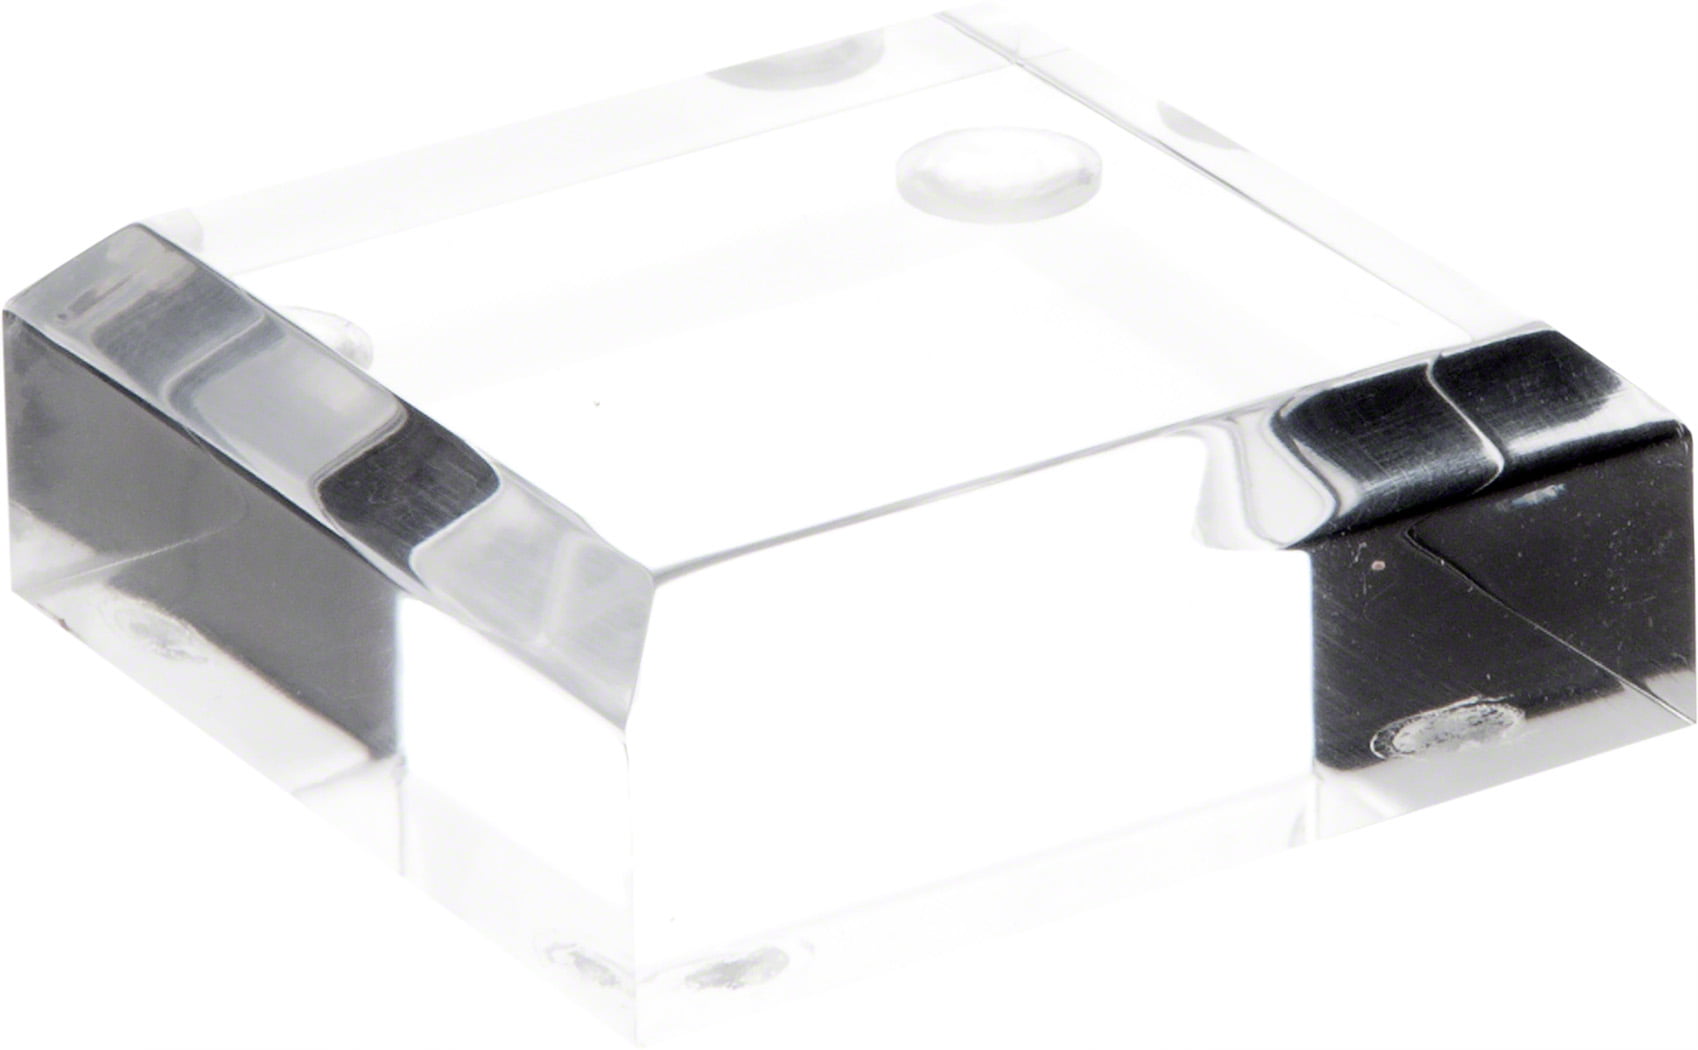 Plymor Clear Polished Acrylic Square Beveled Display Base 1" H x 2" W x 2" D 